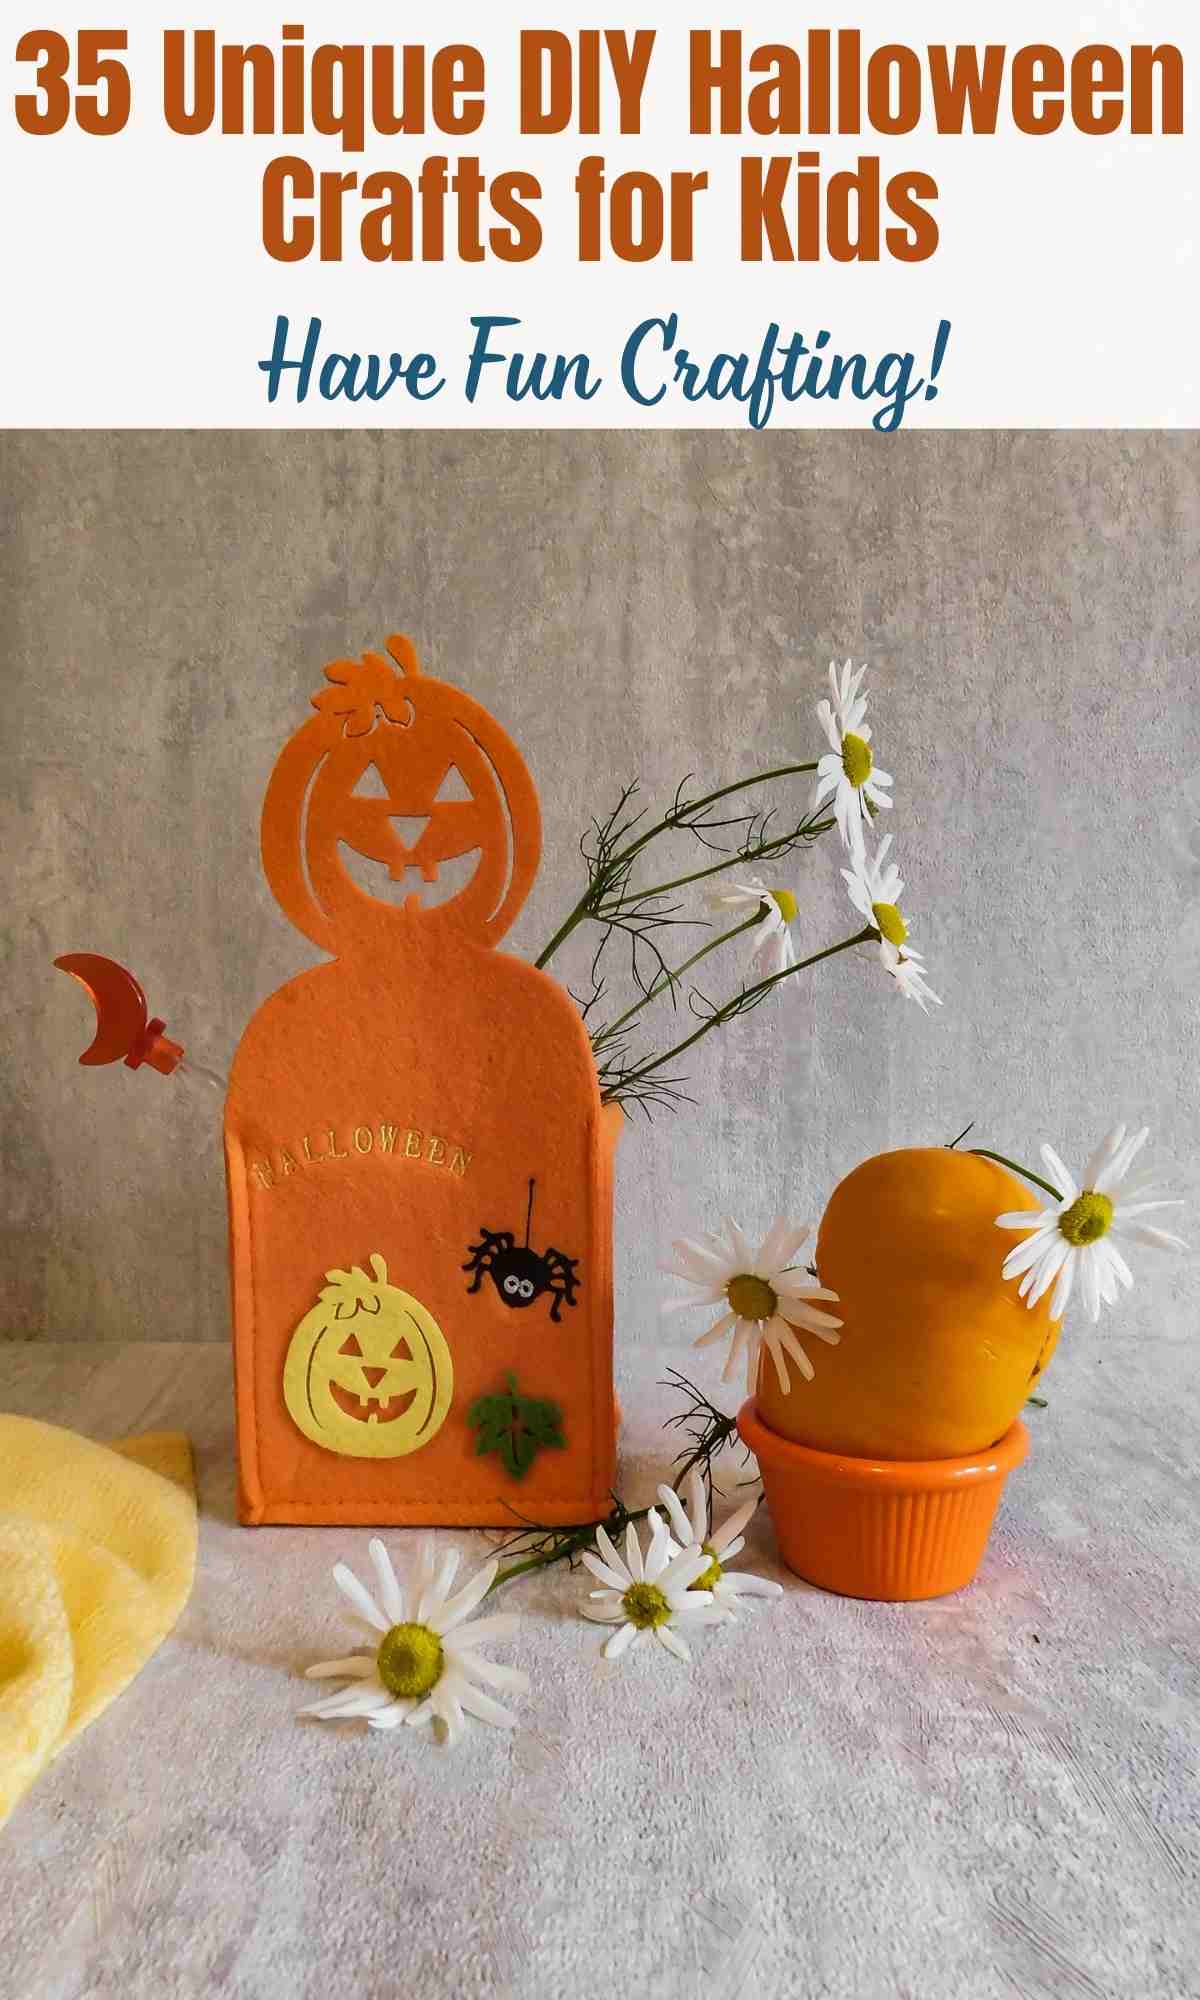 35 Unique DIY Halloween Crafts for Kids - Have Fun Crafting!